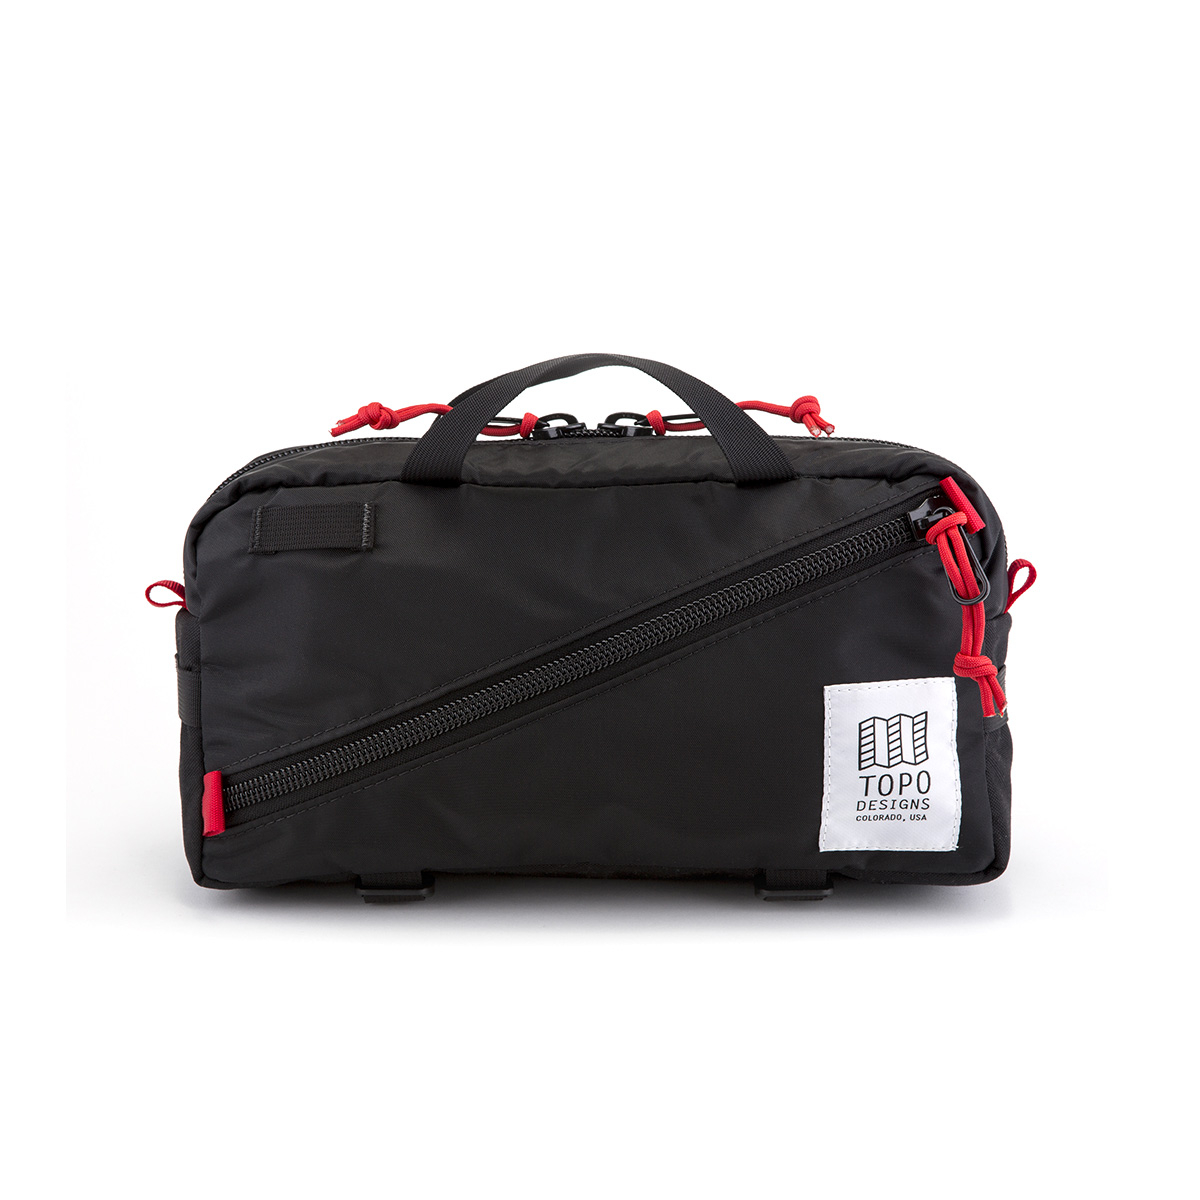 Topo Designs Quick Pack Black, can be slung over your shoulder or worn around your waist, fanny pack style